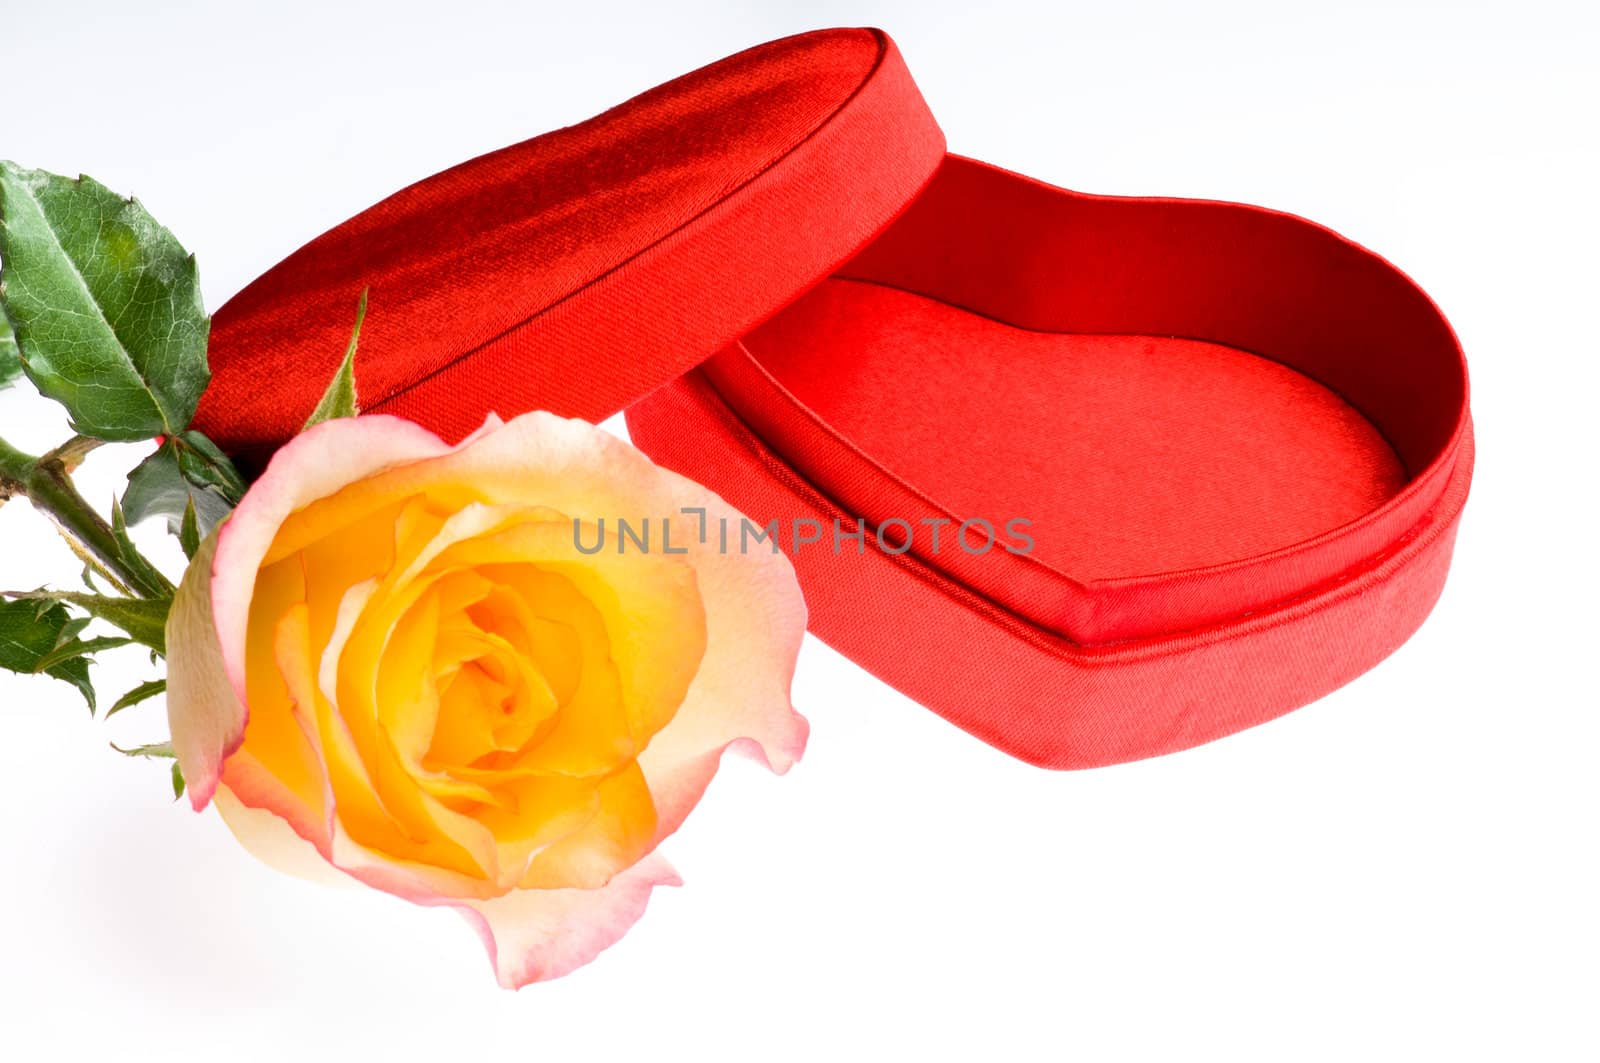 Red yellow rose and a heart shape box by 3523Studio